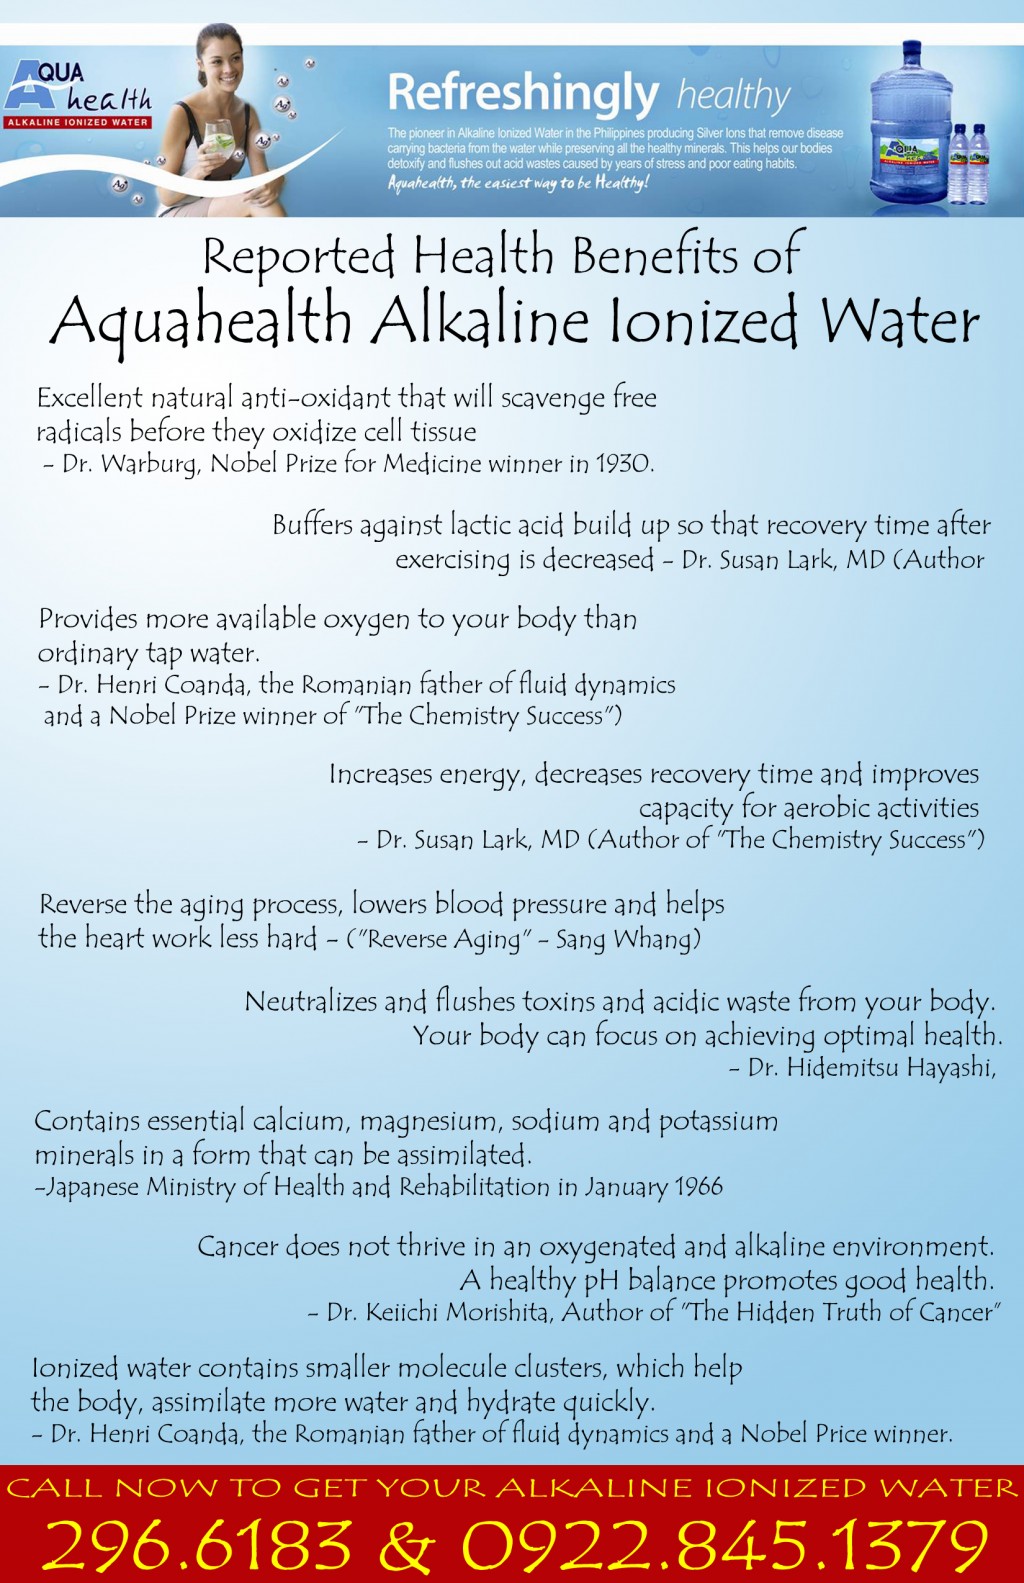 Alkaline Ionized Water and Its Benefits